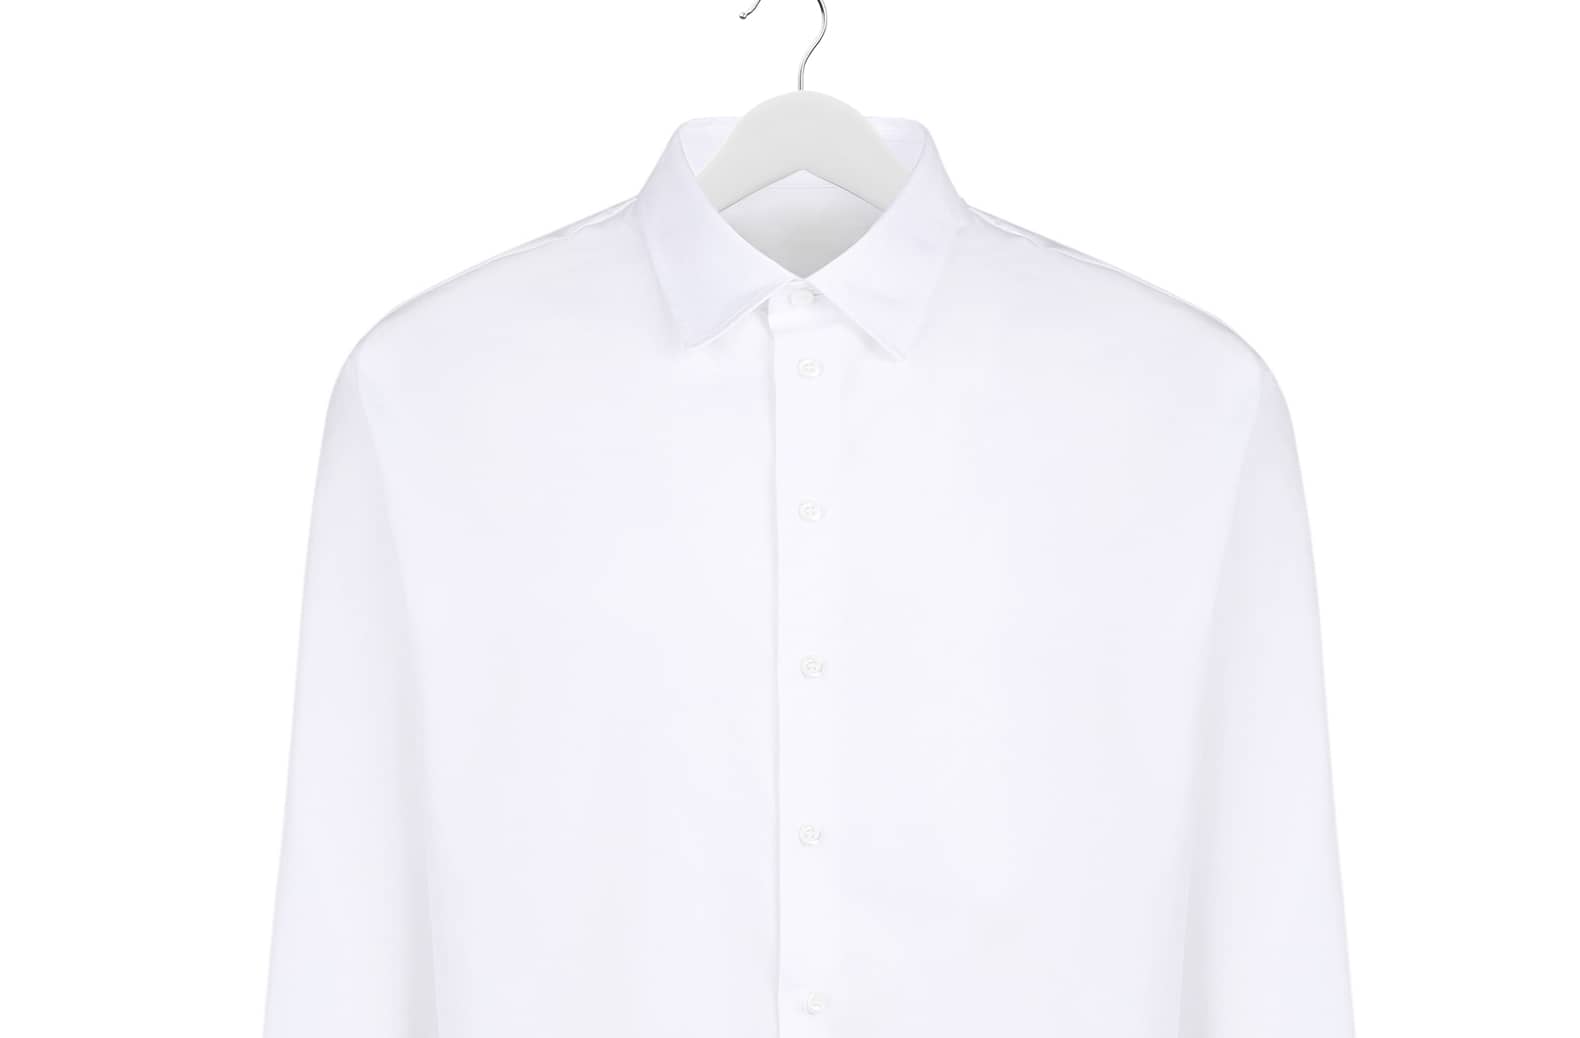 Easily book professional shirt cleaning online